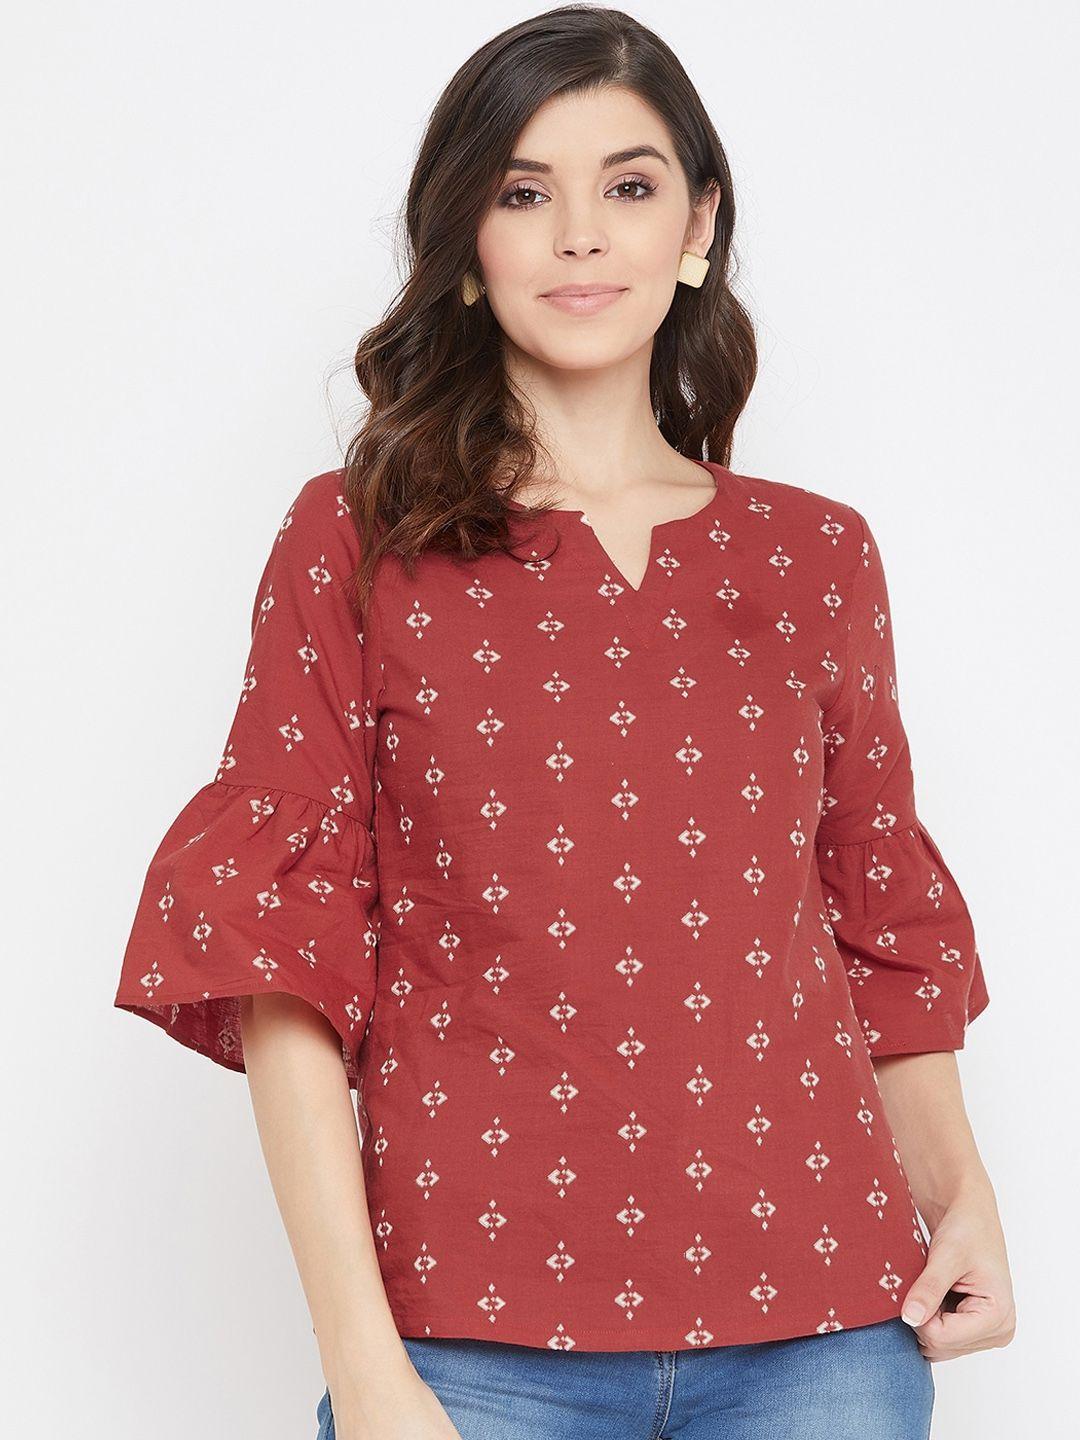 color cocktail women red printed pure cotton top